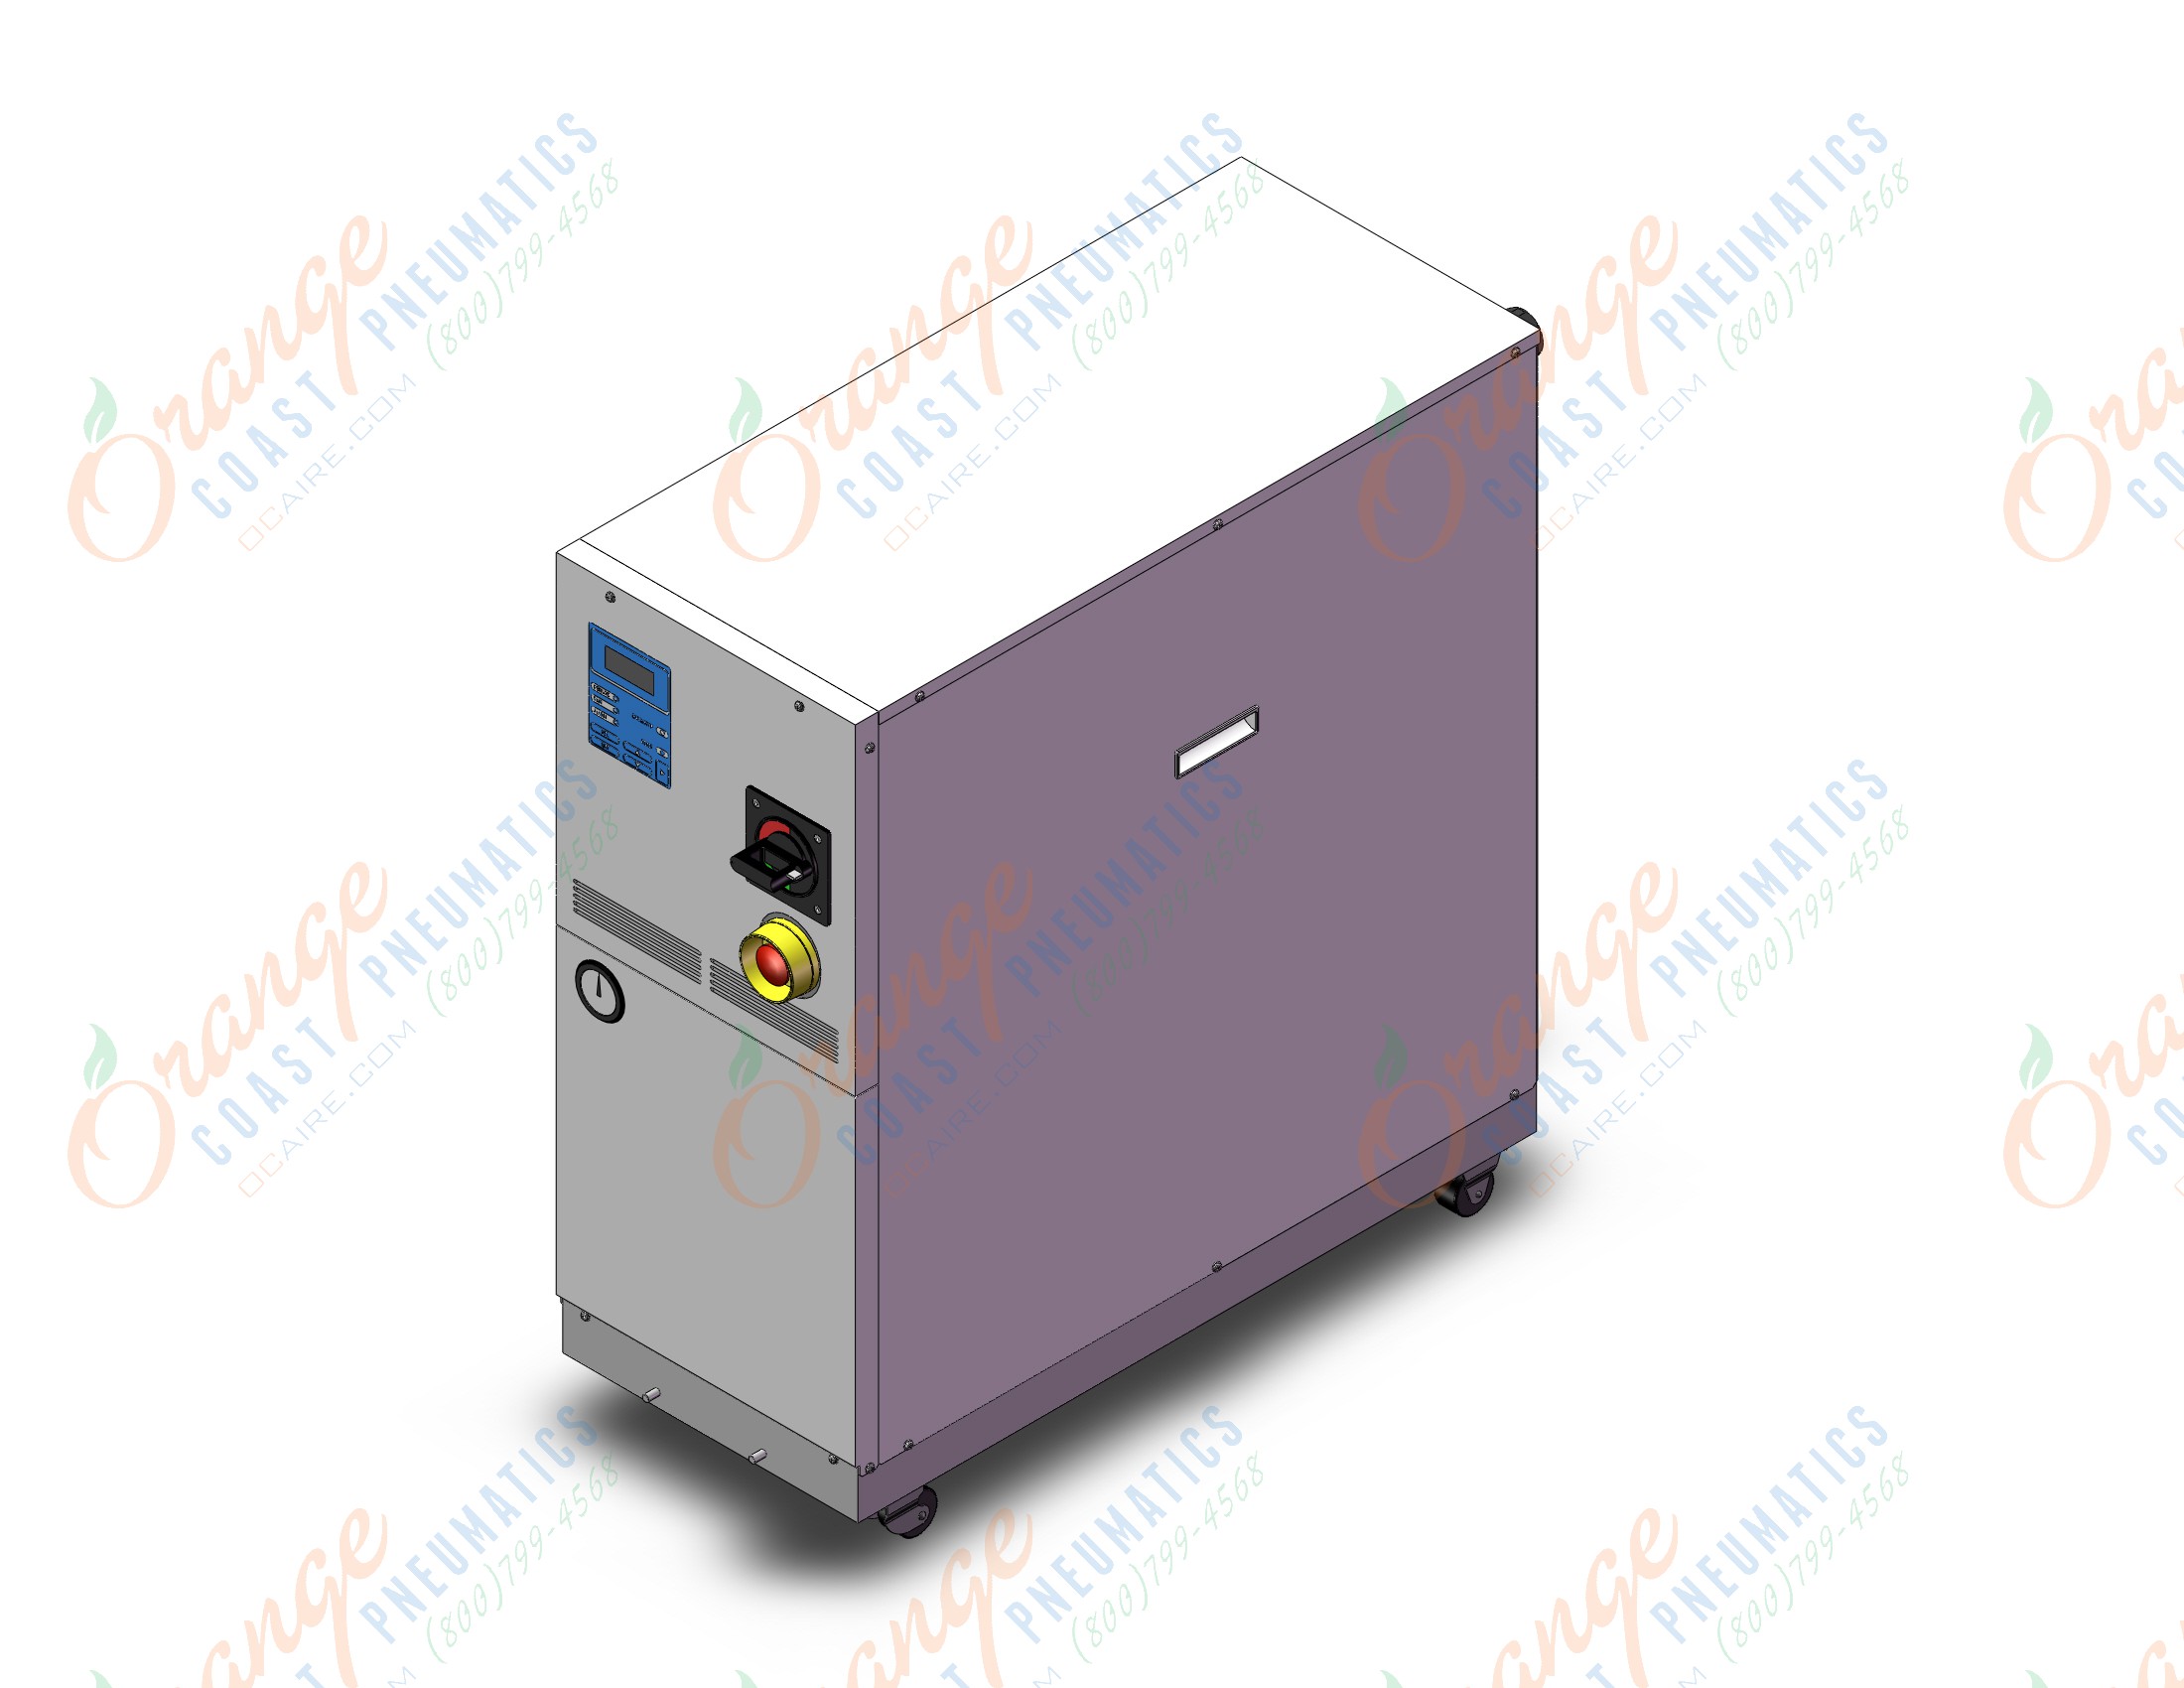 SMC HRZ010-W2S-CNY thermo chiller, HRZ- THERMO CHILLER